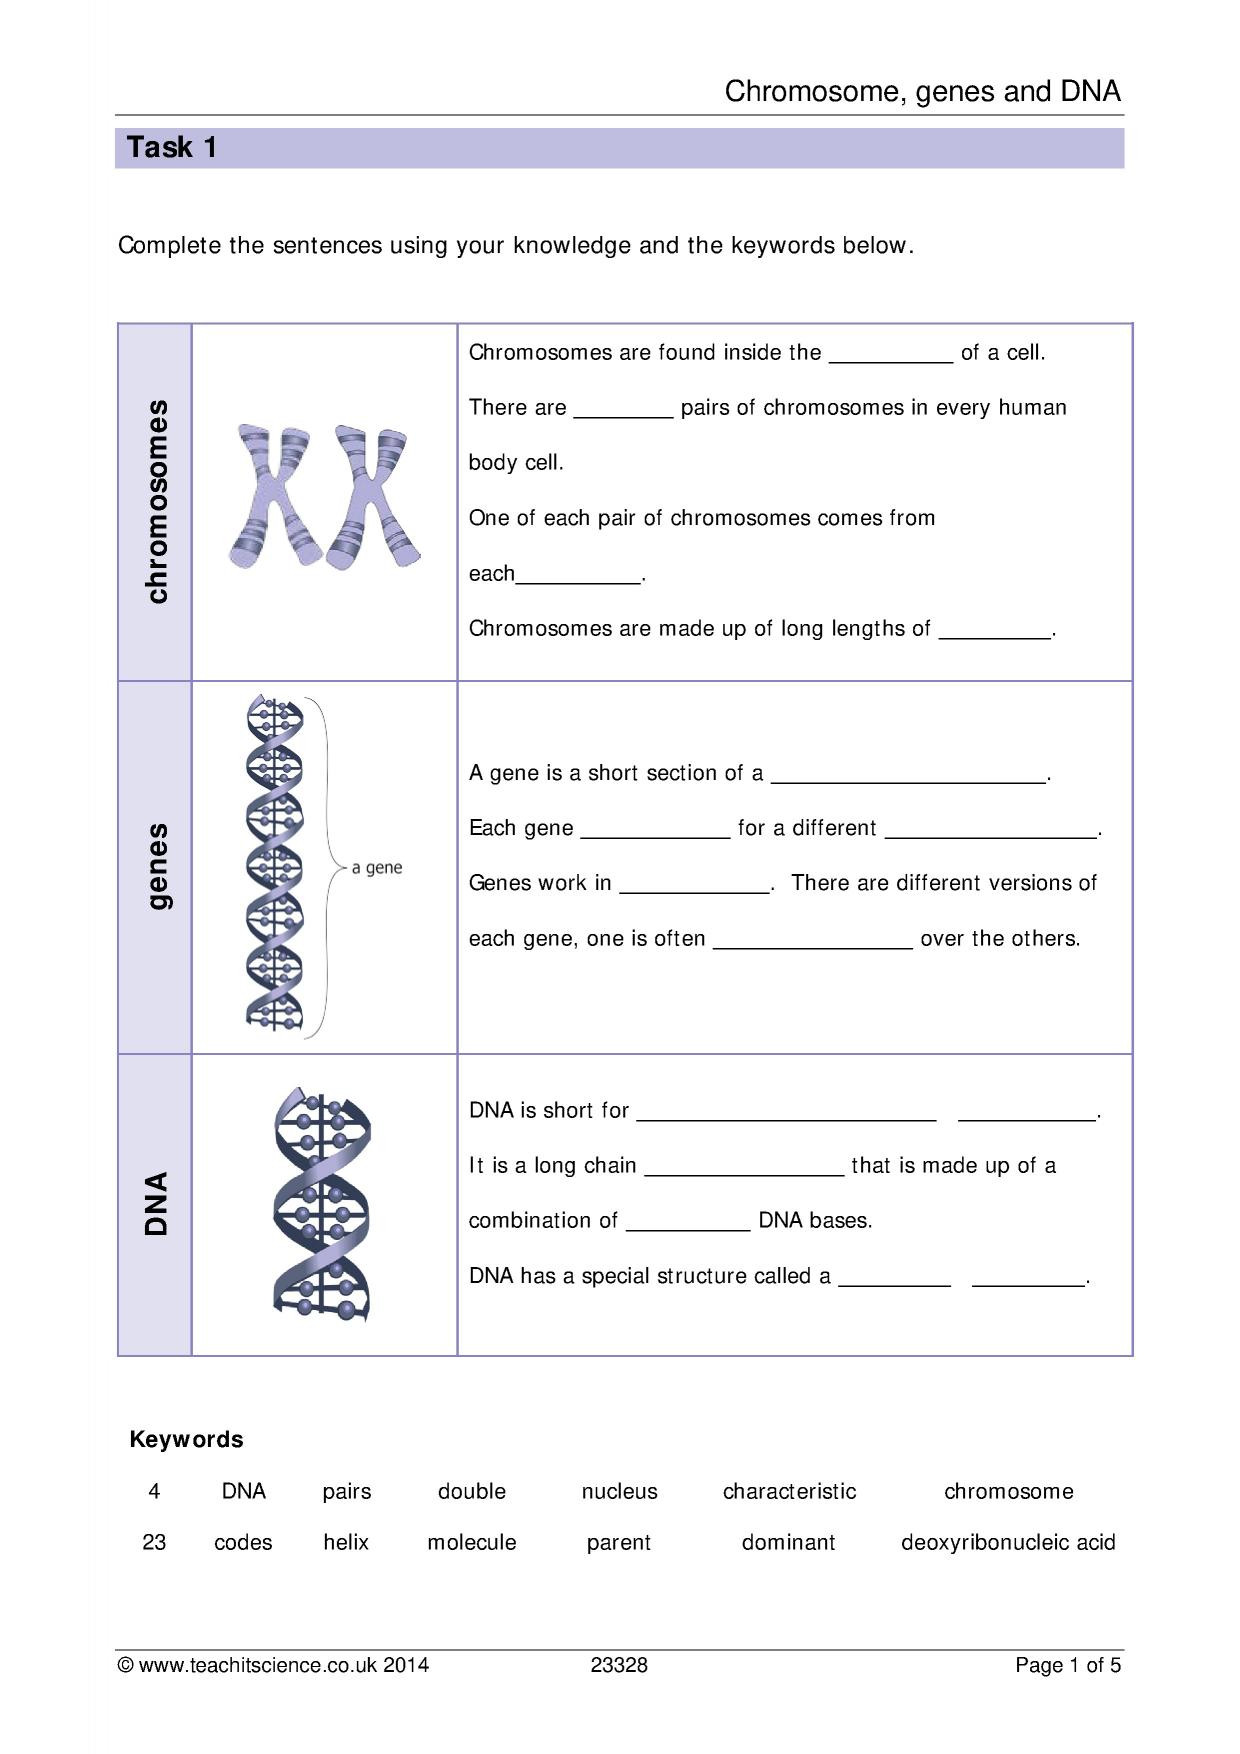 Dna Structure Worksheet Answer Key Chromosomes Genes and Dna Worksheet with Answers